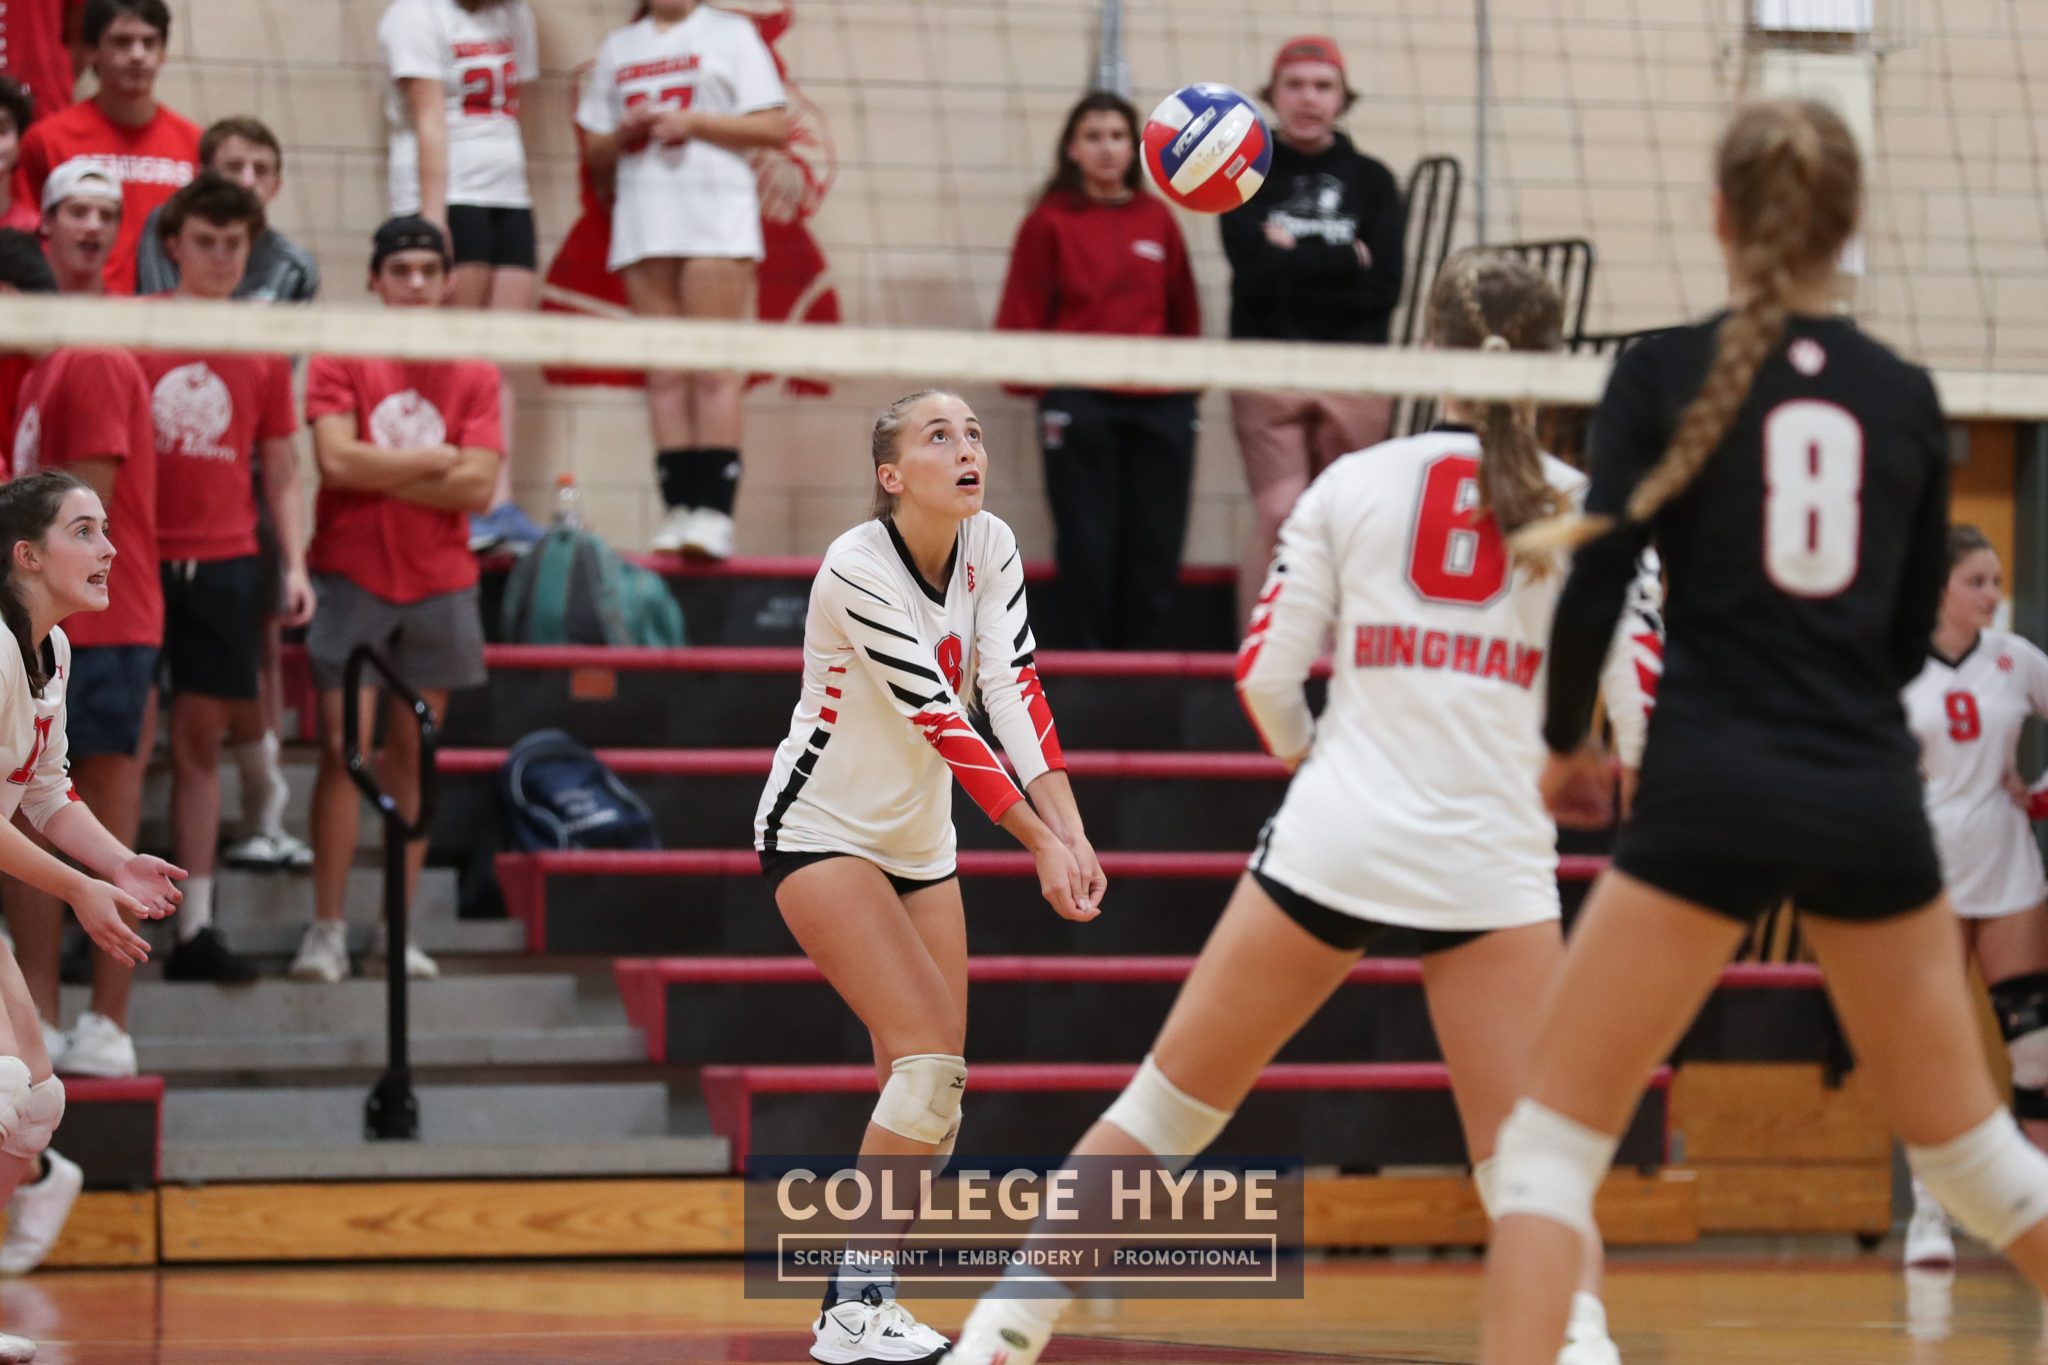 Senior volleyball captain Mathilde Megard is this week's Athlete of the Week presented by College Hype.